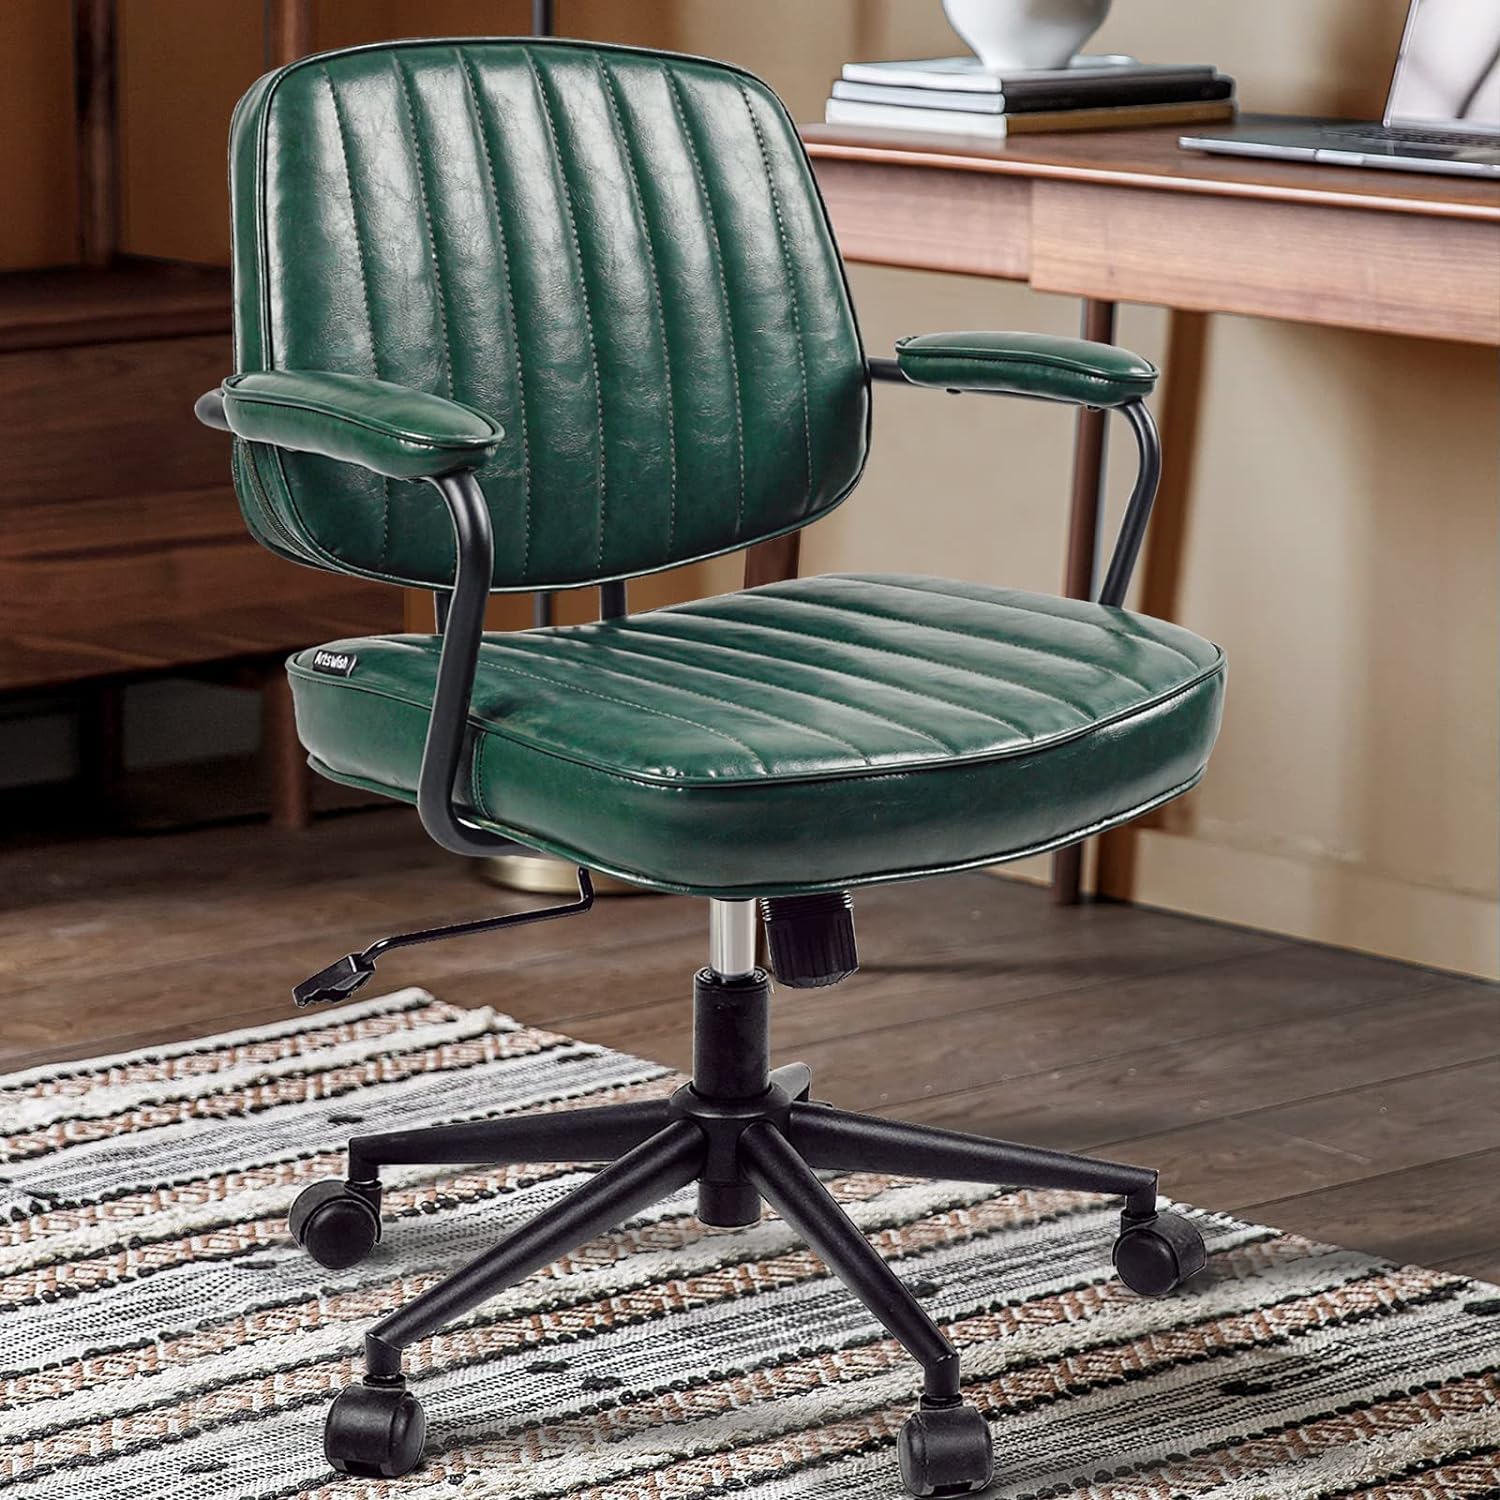 TKM Home Artswish Mid Century Office Chair Leather Desk Chair Green Office Desk Chair Home Office Chair With Wheels And Arms